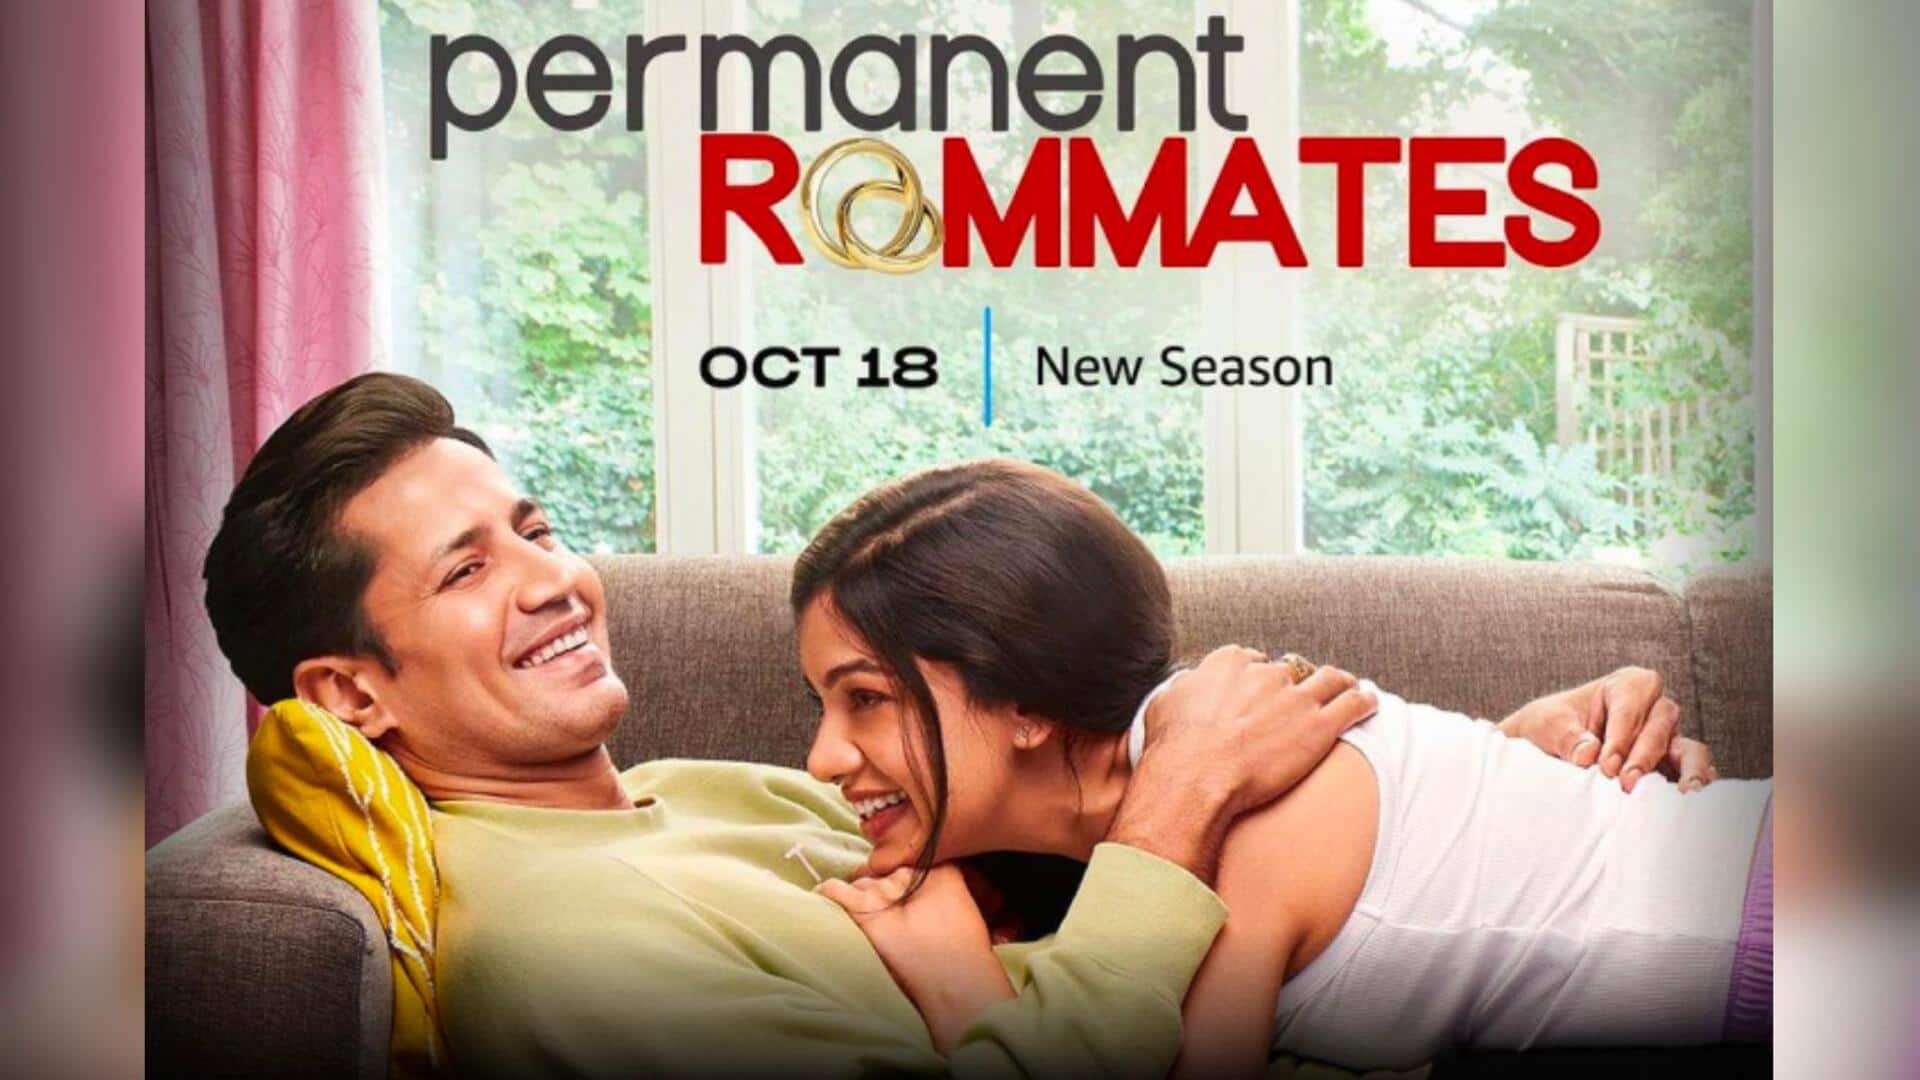 'Permanent Roommates' S03 trailer released: Premiere date, plot—everything to know